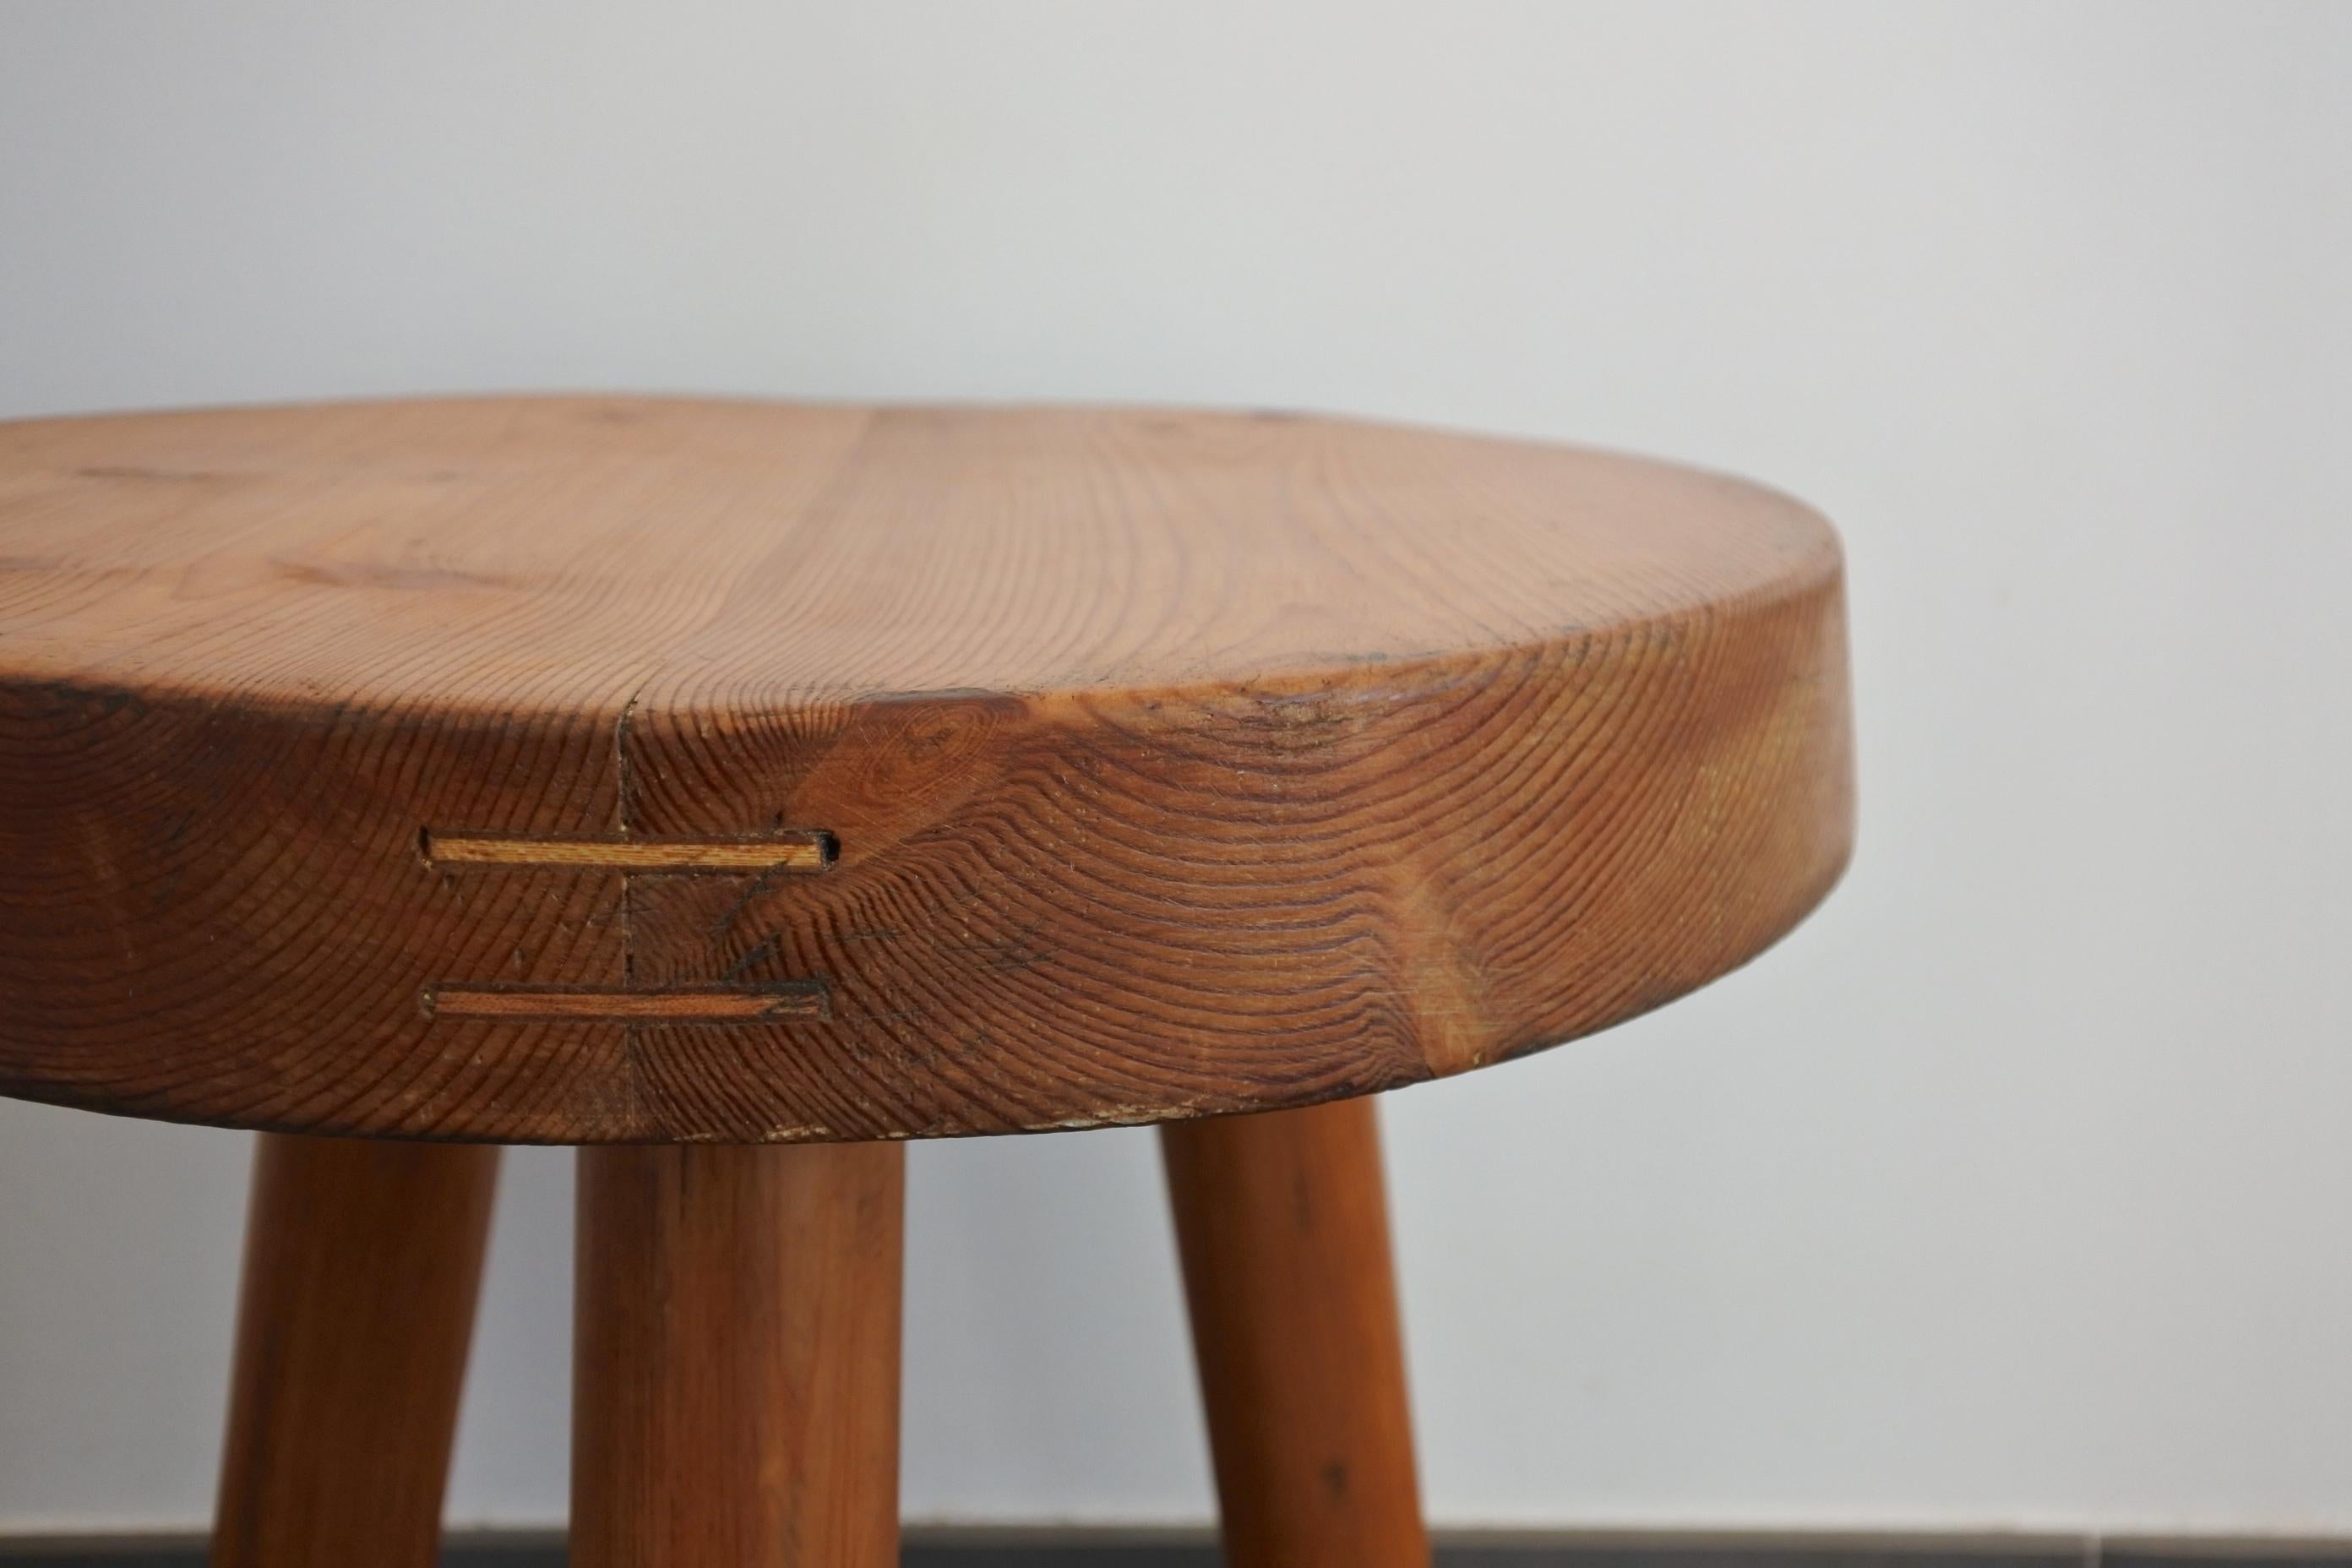 Early Tripod stool by Charlotte Perriand.
Edited in France by Georges Blanchon in the late 1940s-early 1950s.
Hand carved solid pine wood with an outstanding grain.
Great patina.